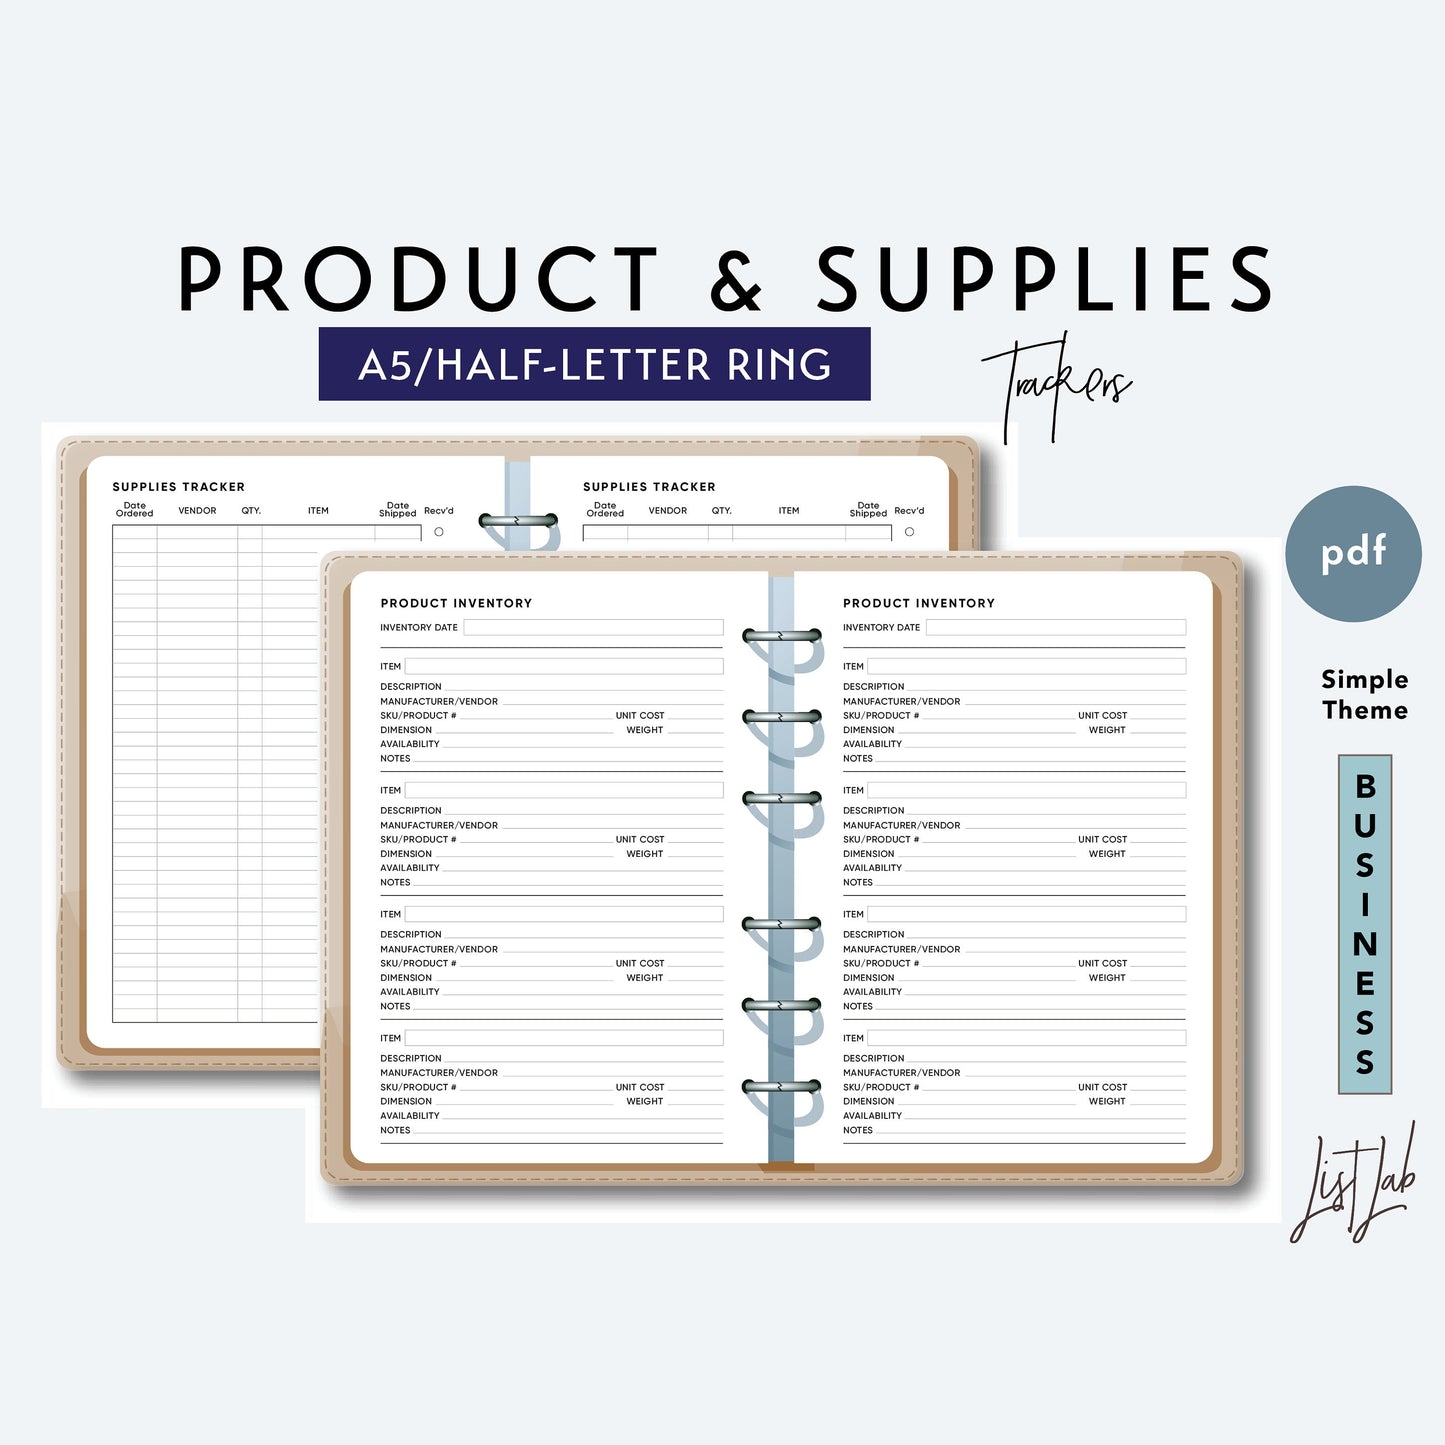 A5 / Half-Letter Ring PRODUCT & SUPPLIES Inventories Printable Set